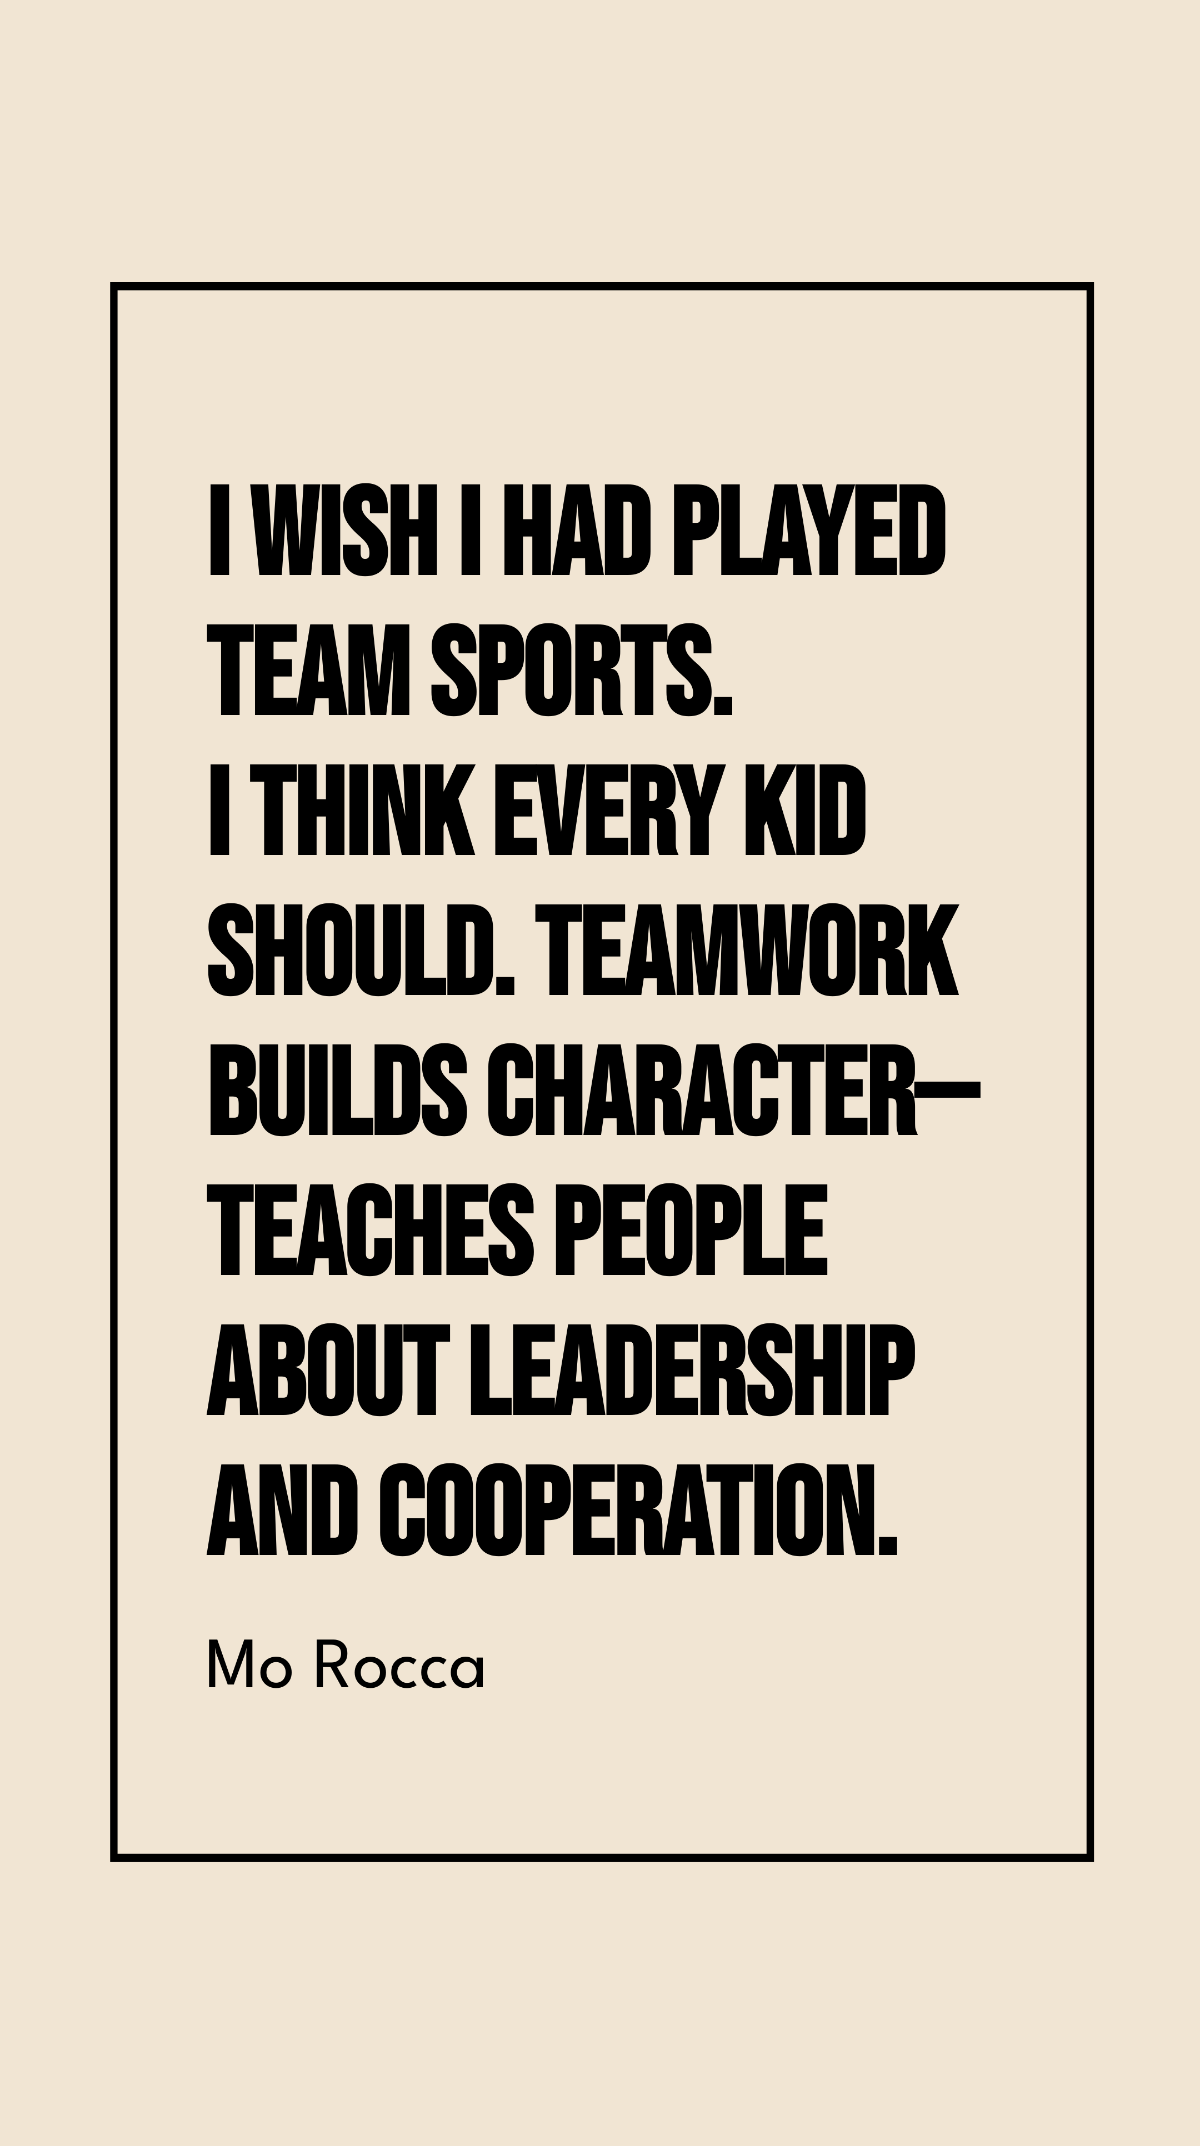 Mo Rocca - I wish I had played team sports. I think every kid should. Teamwork builds character - teaches people about leadership and cooperation. Template